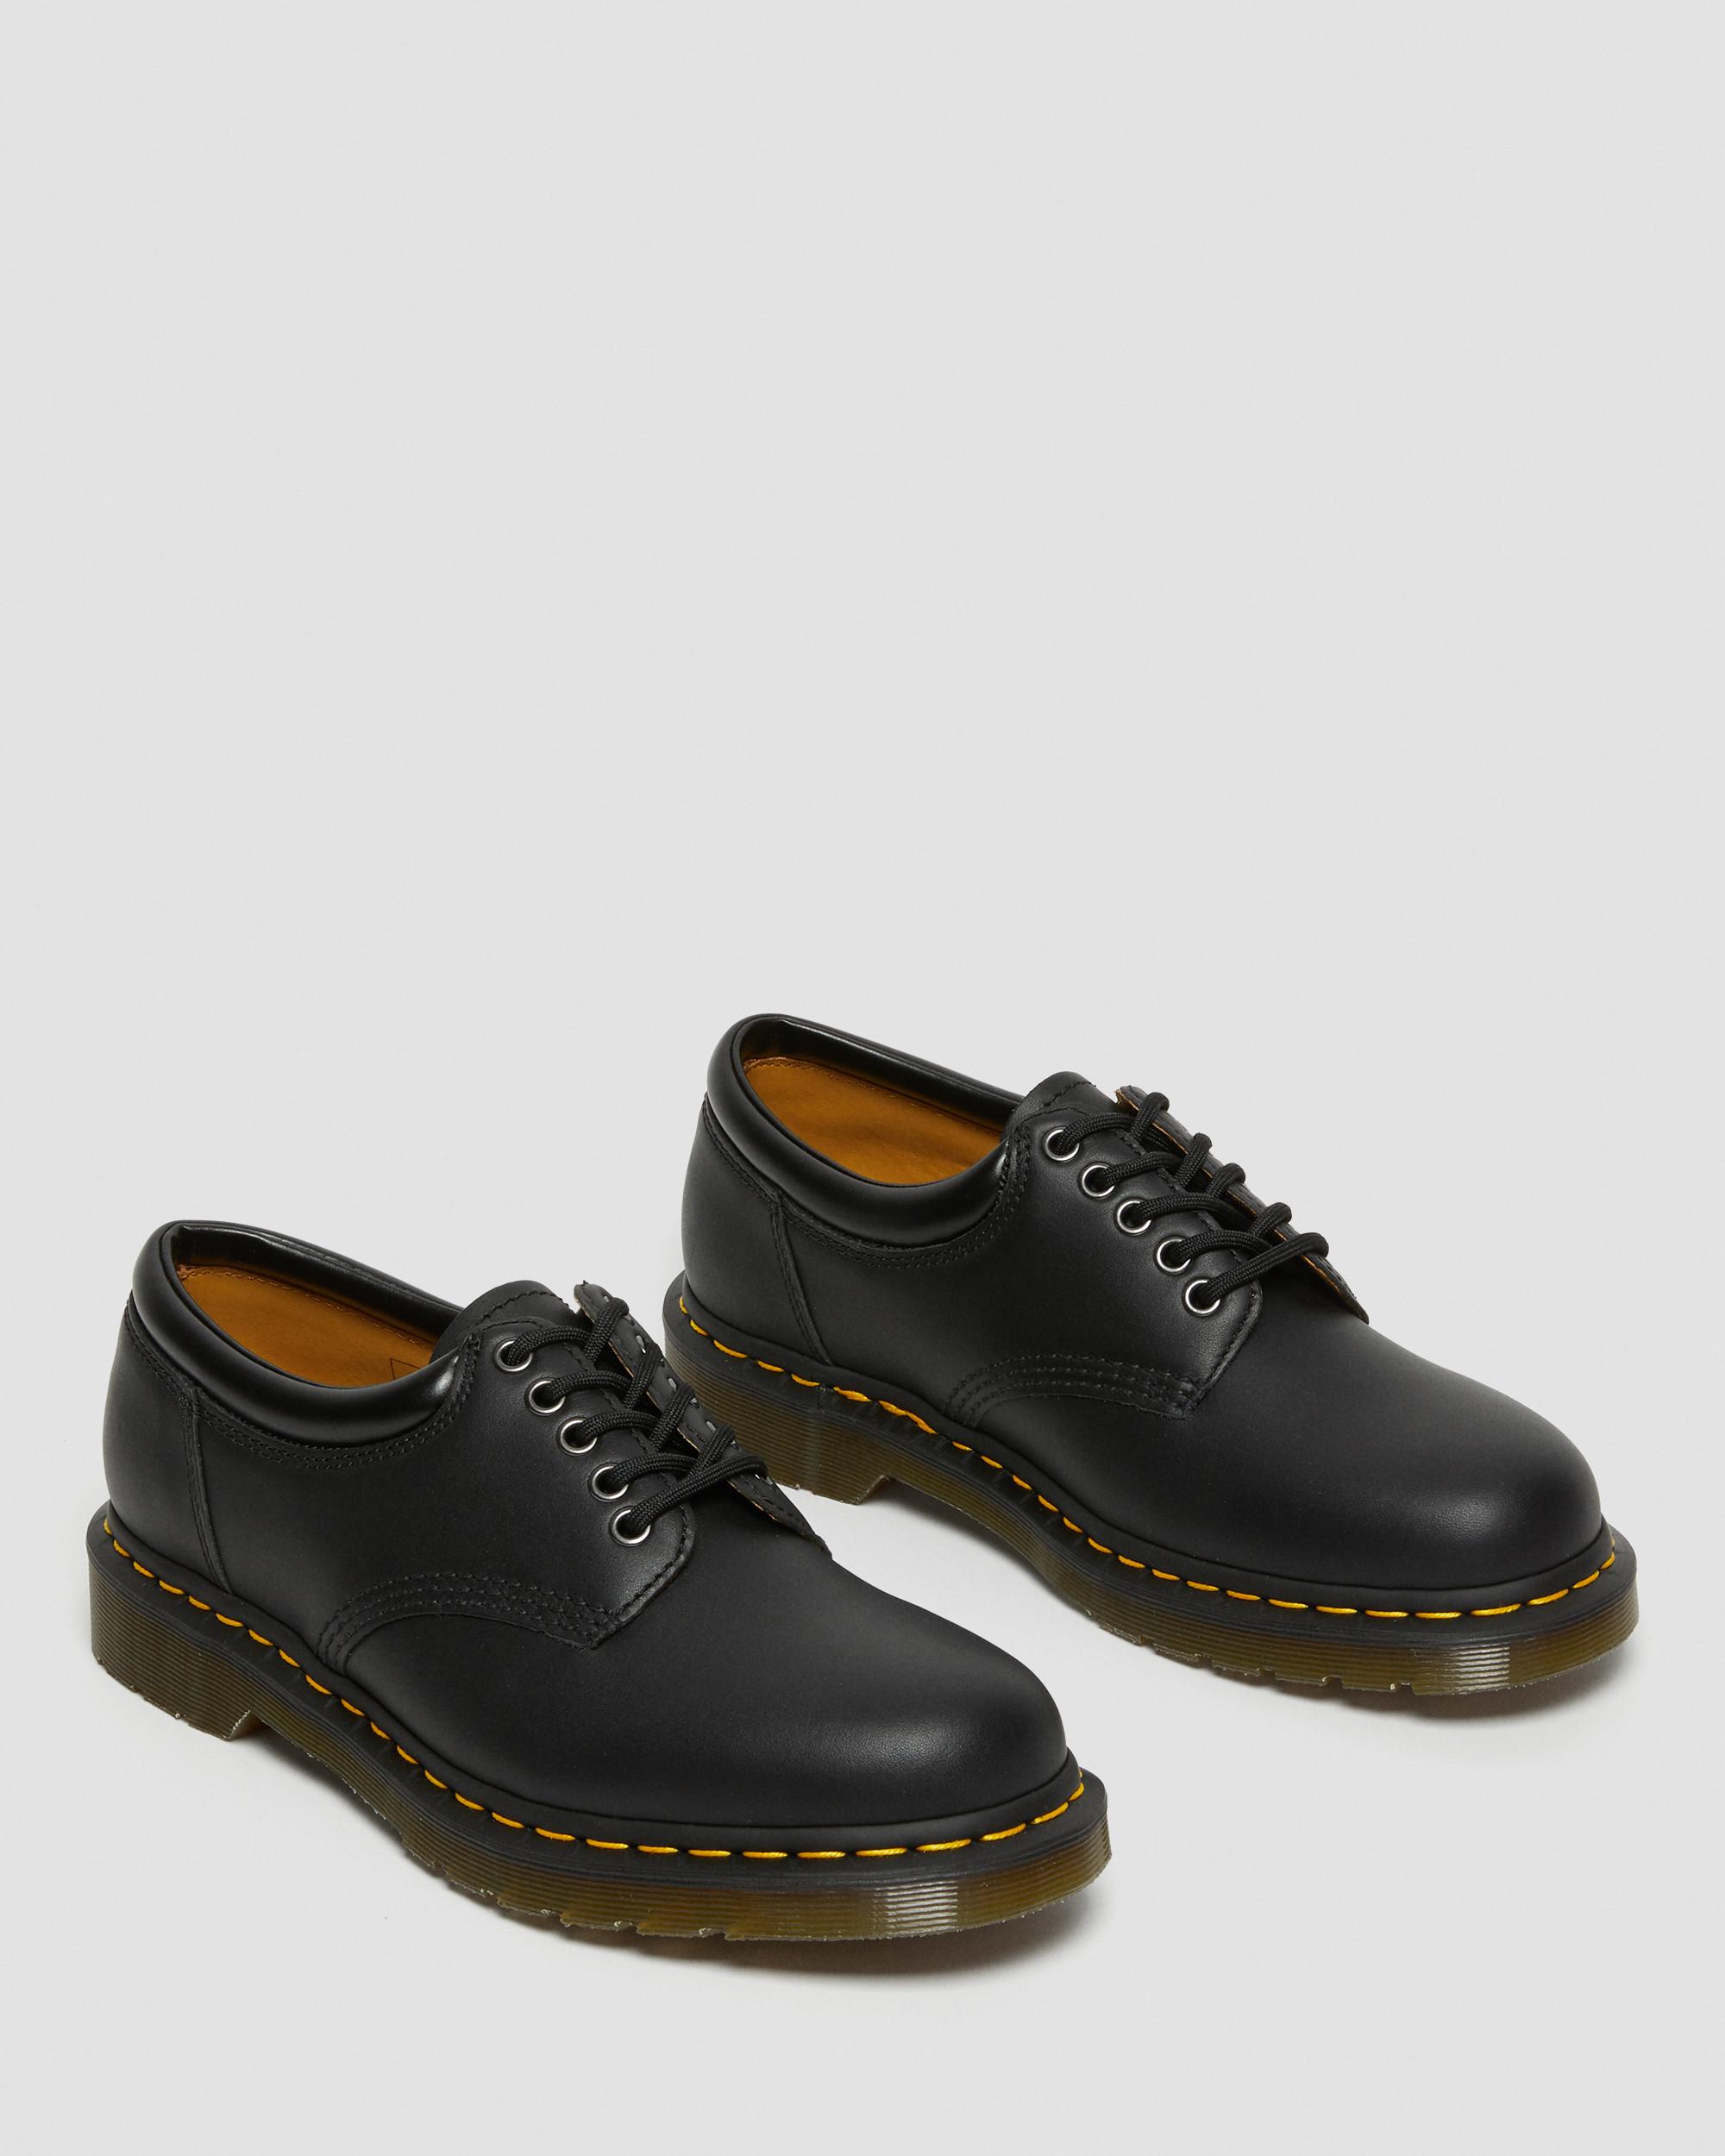 DR MARTENS 8053 Nappa Leather Casual Shoes